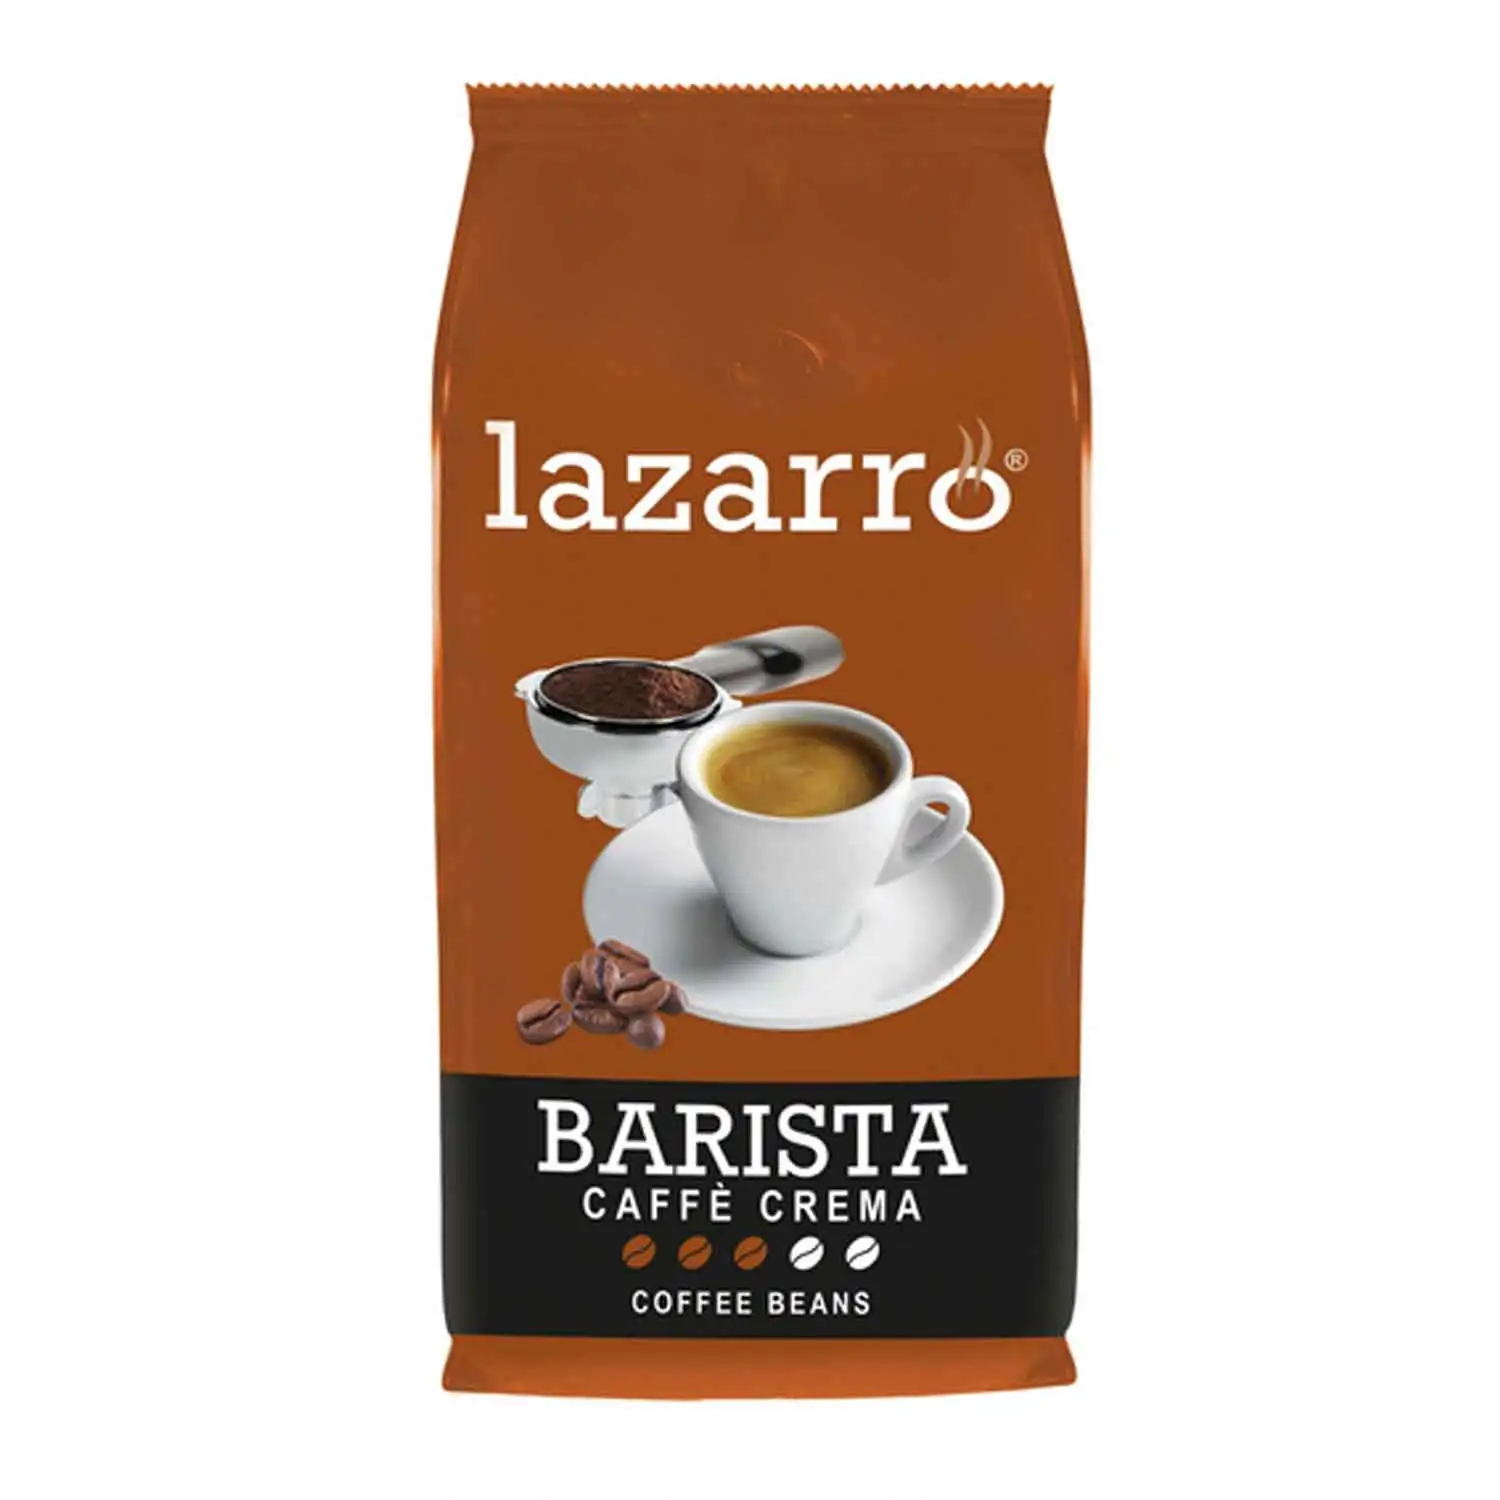 Lazarro coffee beans barista 1kg - Buy at Real Tobacco